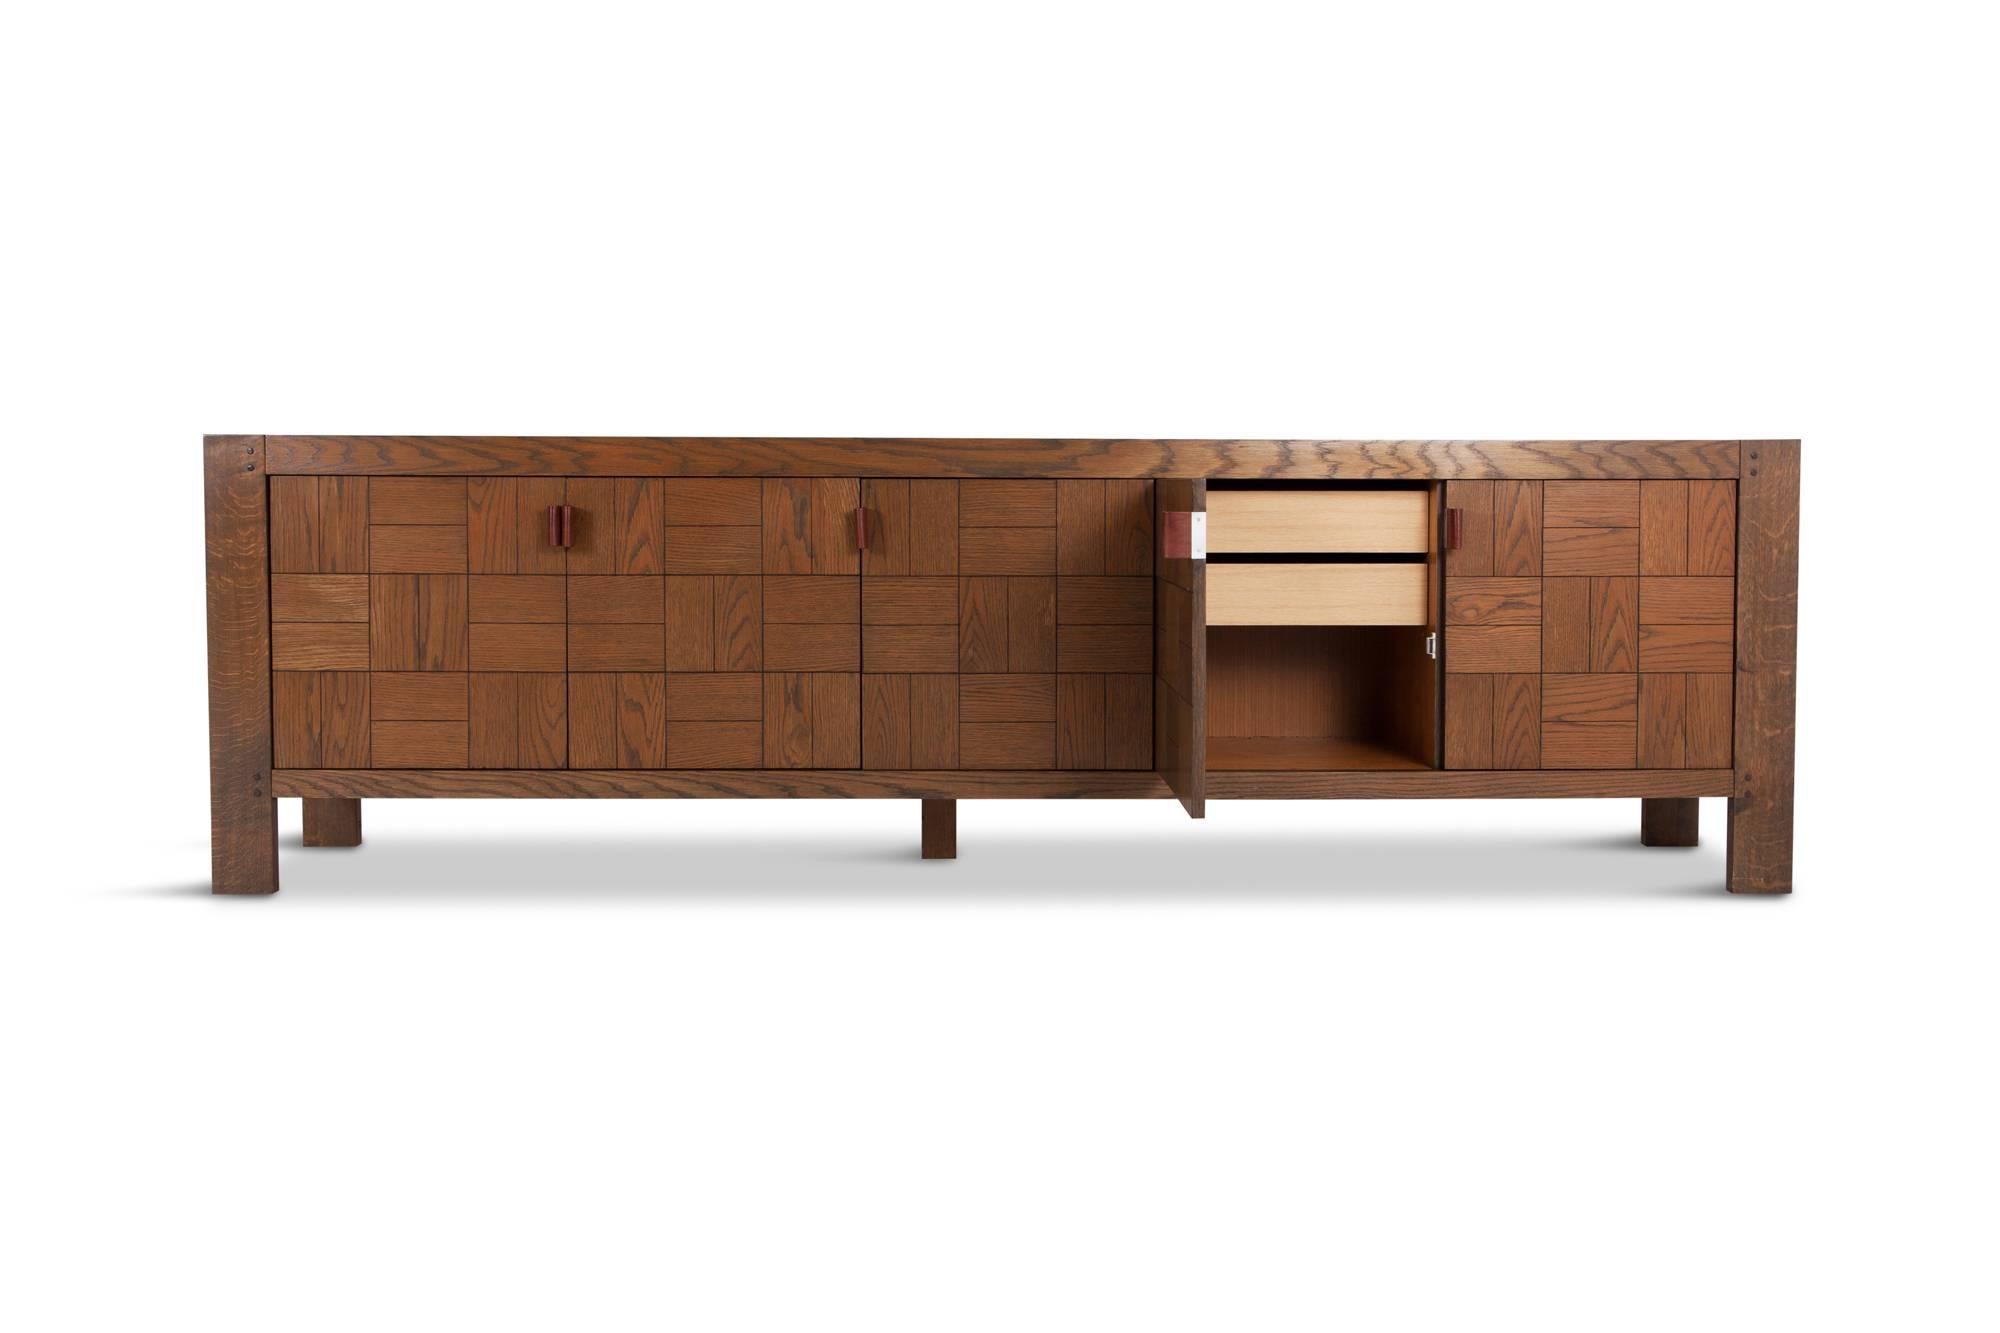 Postmodern Scarpa style Brutalist credenza. The cabinet is provided with geometric door panels with stained oak inlay and finished with beautiful cognac leather door handles. The cabinets show a beautiful grain and provide plenty of storage